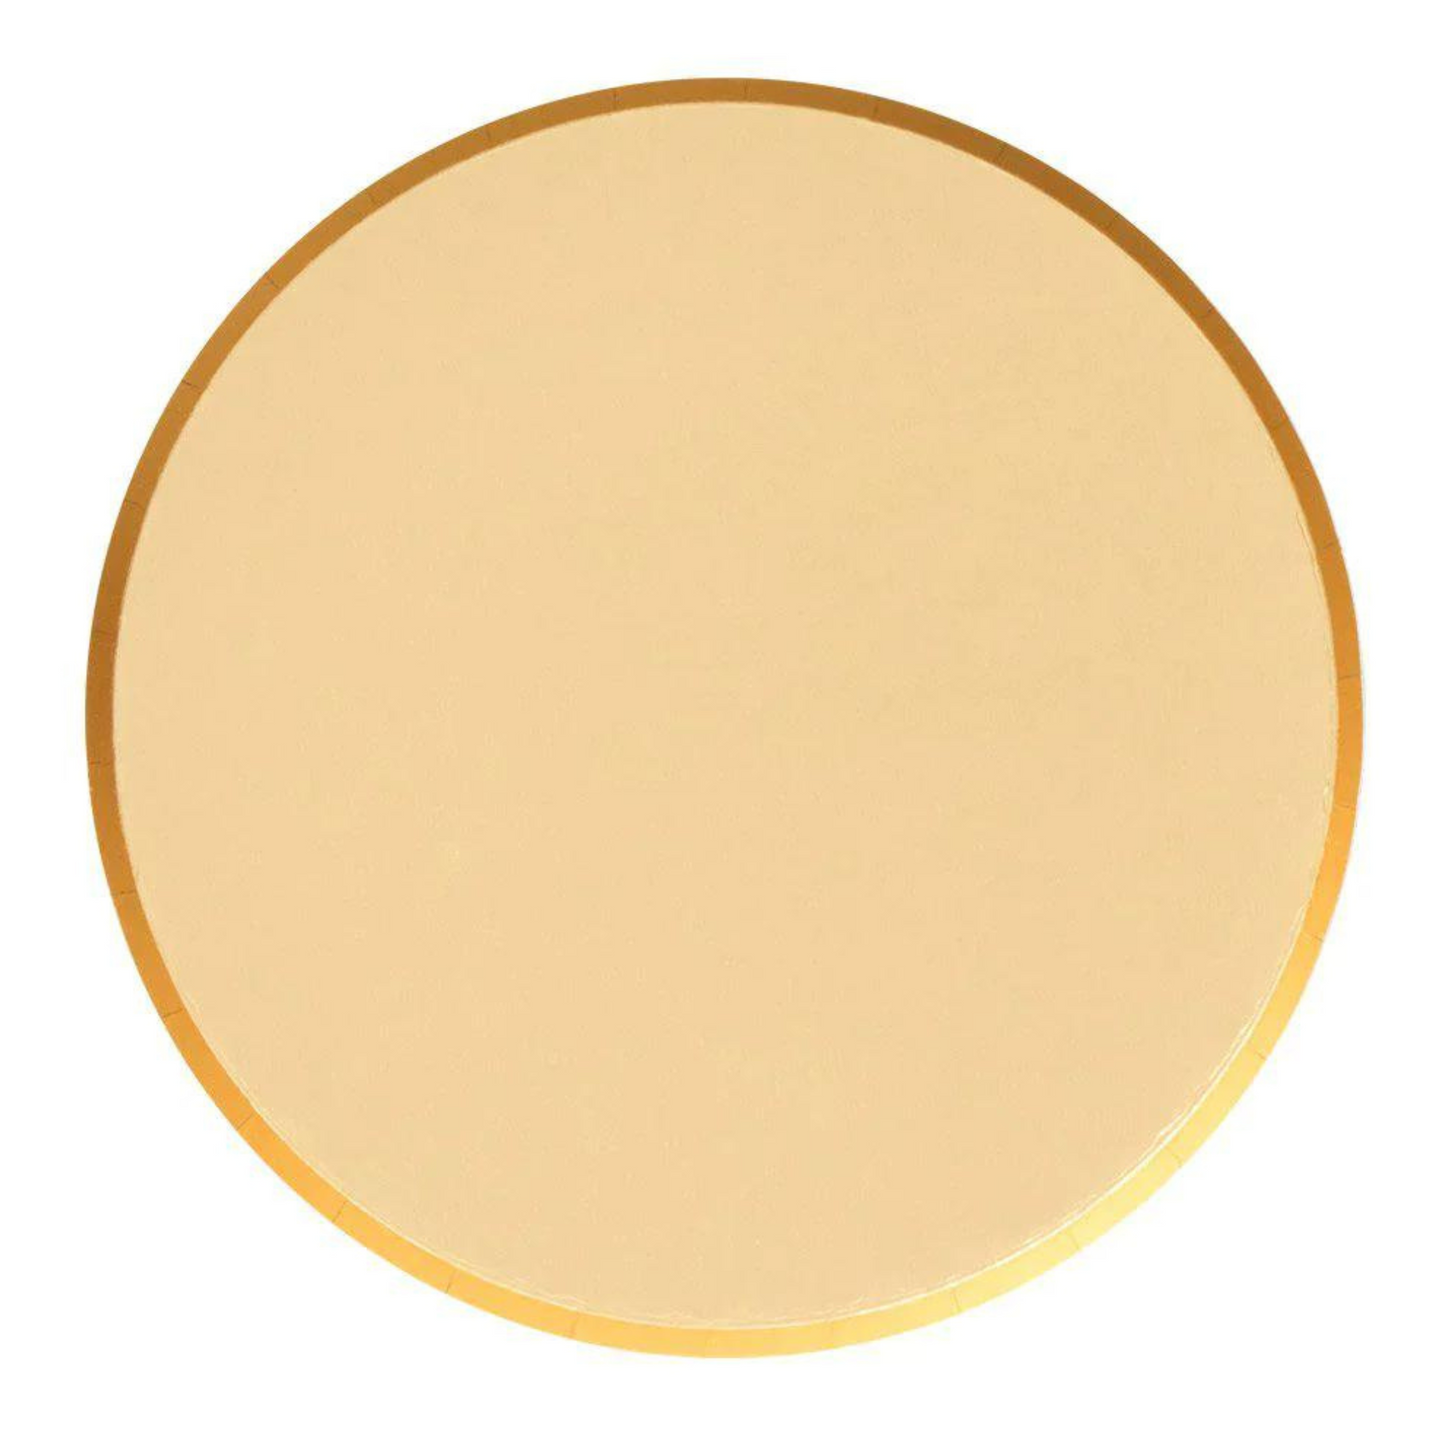 OH HAPPY DAY GOLD DINNER PLATES